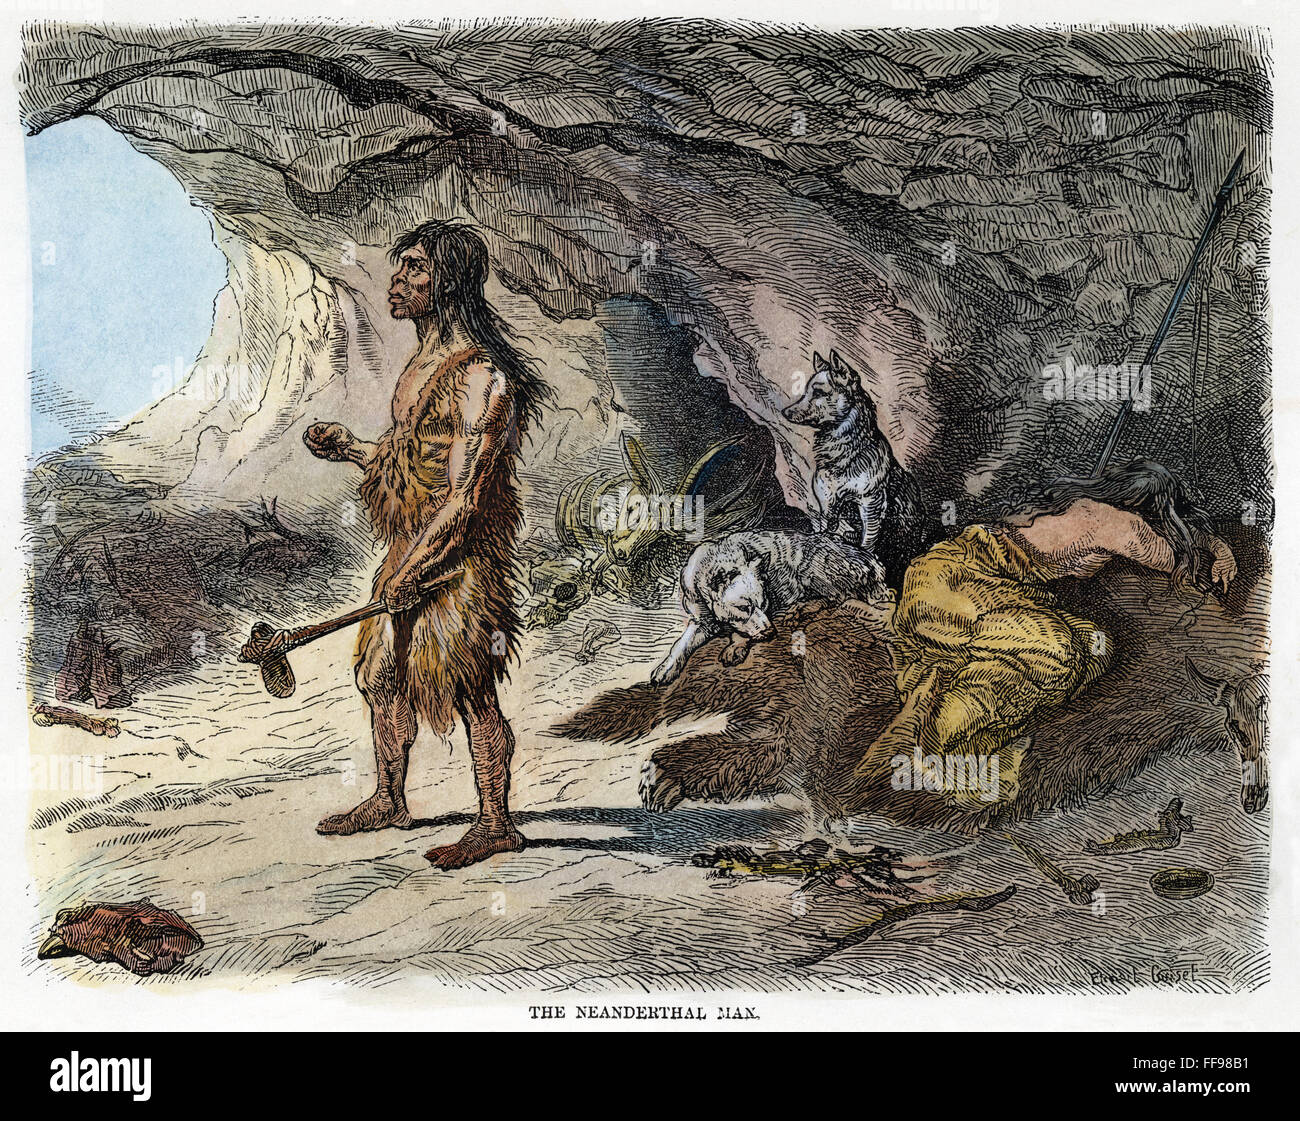 NEANDERTHAL MAN. /nA late 19th century depiction of Neanderthal man (Homo neanderthalensis) based on the 1857 discovery of human skeletal remains in the Neander Valley, Prussia. Engraving, 1873. Stock Photo